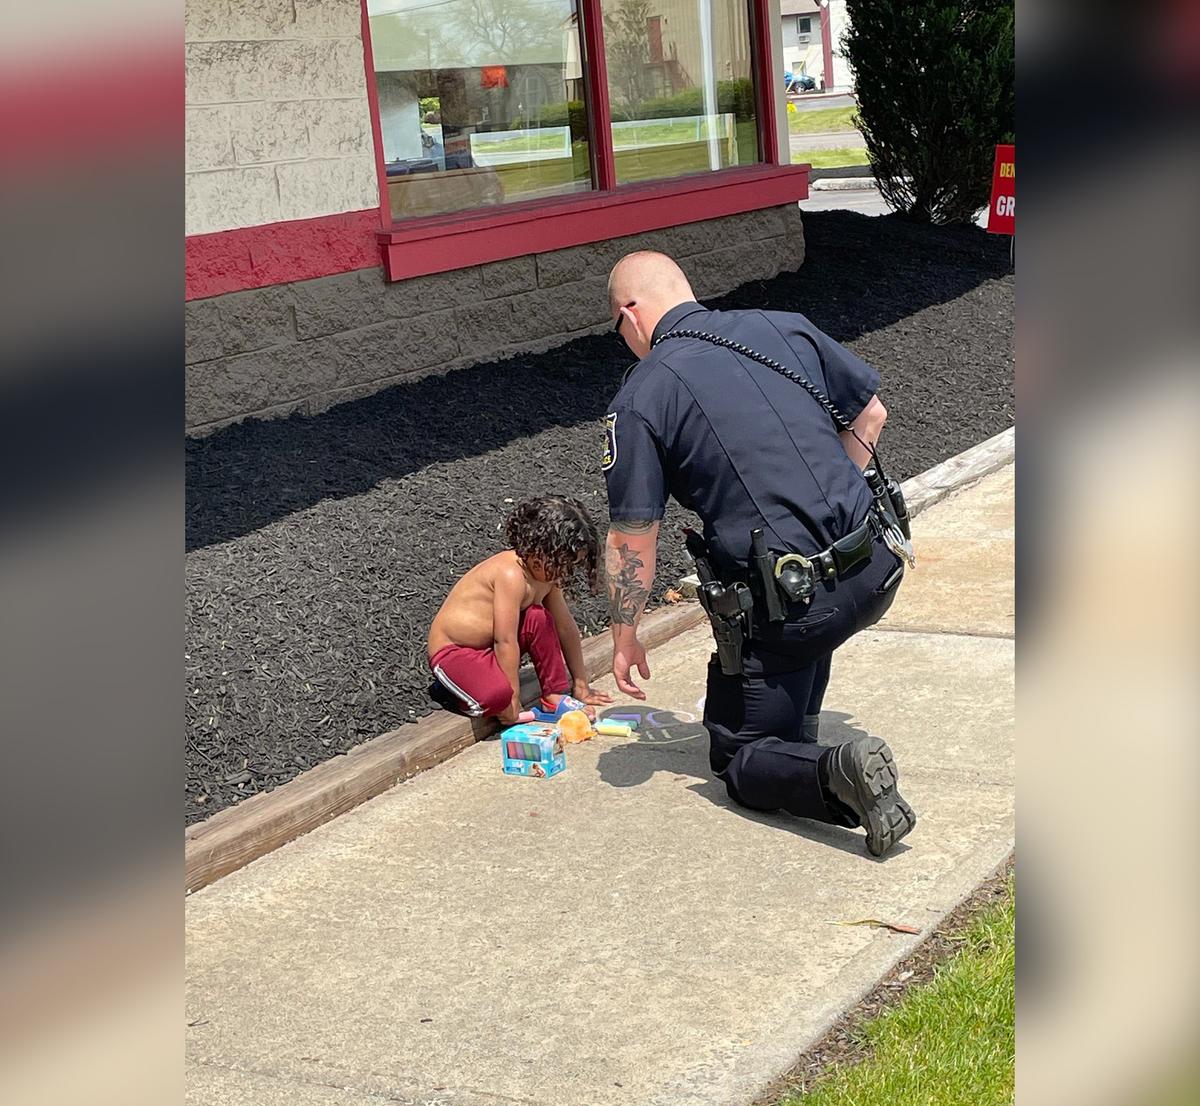 DeWitt police officer Tyler Smith kneels to comfort a 2-year-old outside a Denny's restaurant. (Courtesy of <a href="https://www.facebook.com/DeWitt-Police-Benevolent-Association-102274707996904">DeWitt Police Benevolent Association</a>)